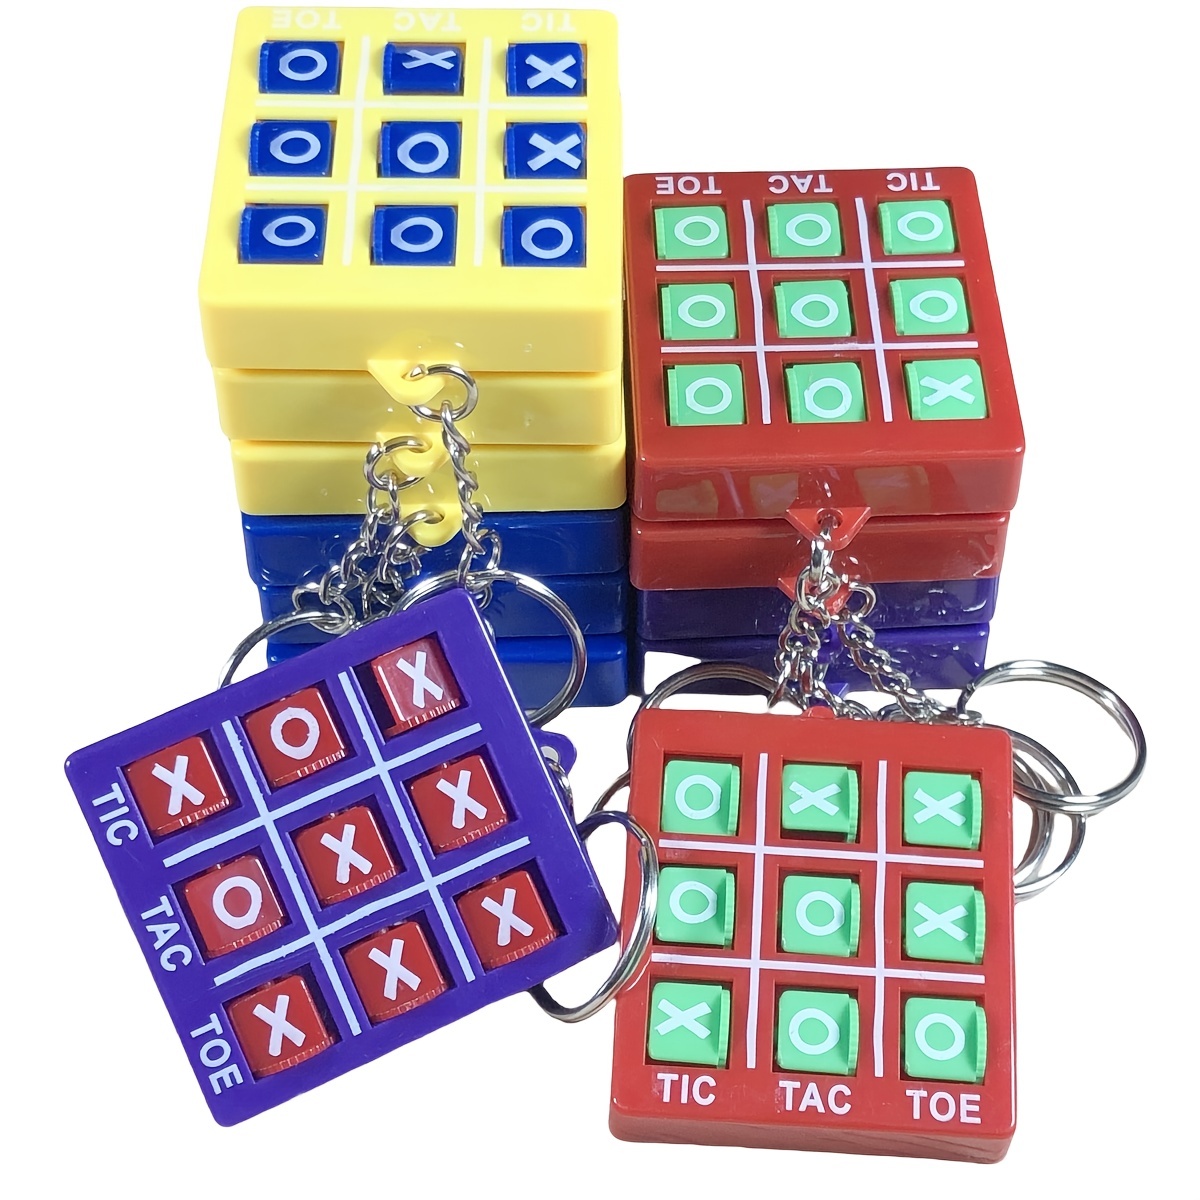 

12-pack Mini Tic Tac Toe Keychains For Kids - Educational Learning Toys For Children Ages 3-6, Plastic Key Ring Games For Birthday Party Favors